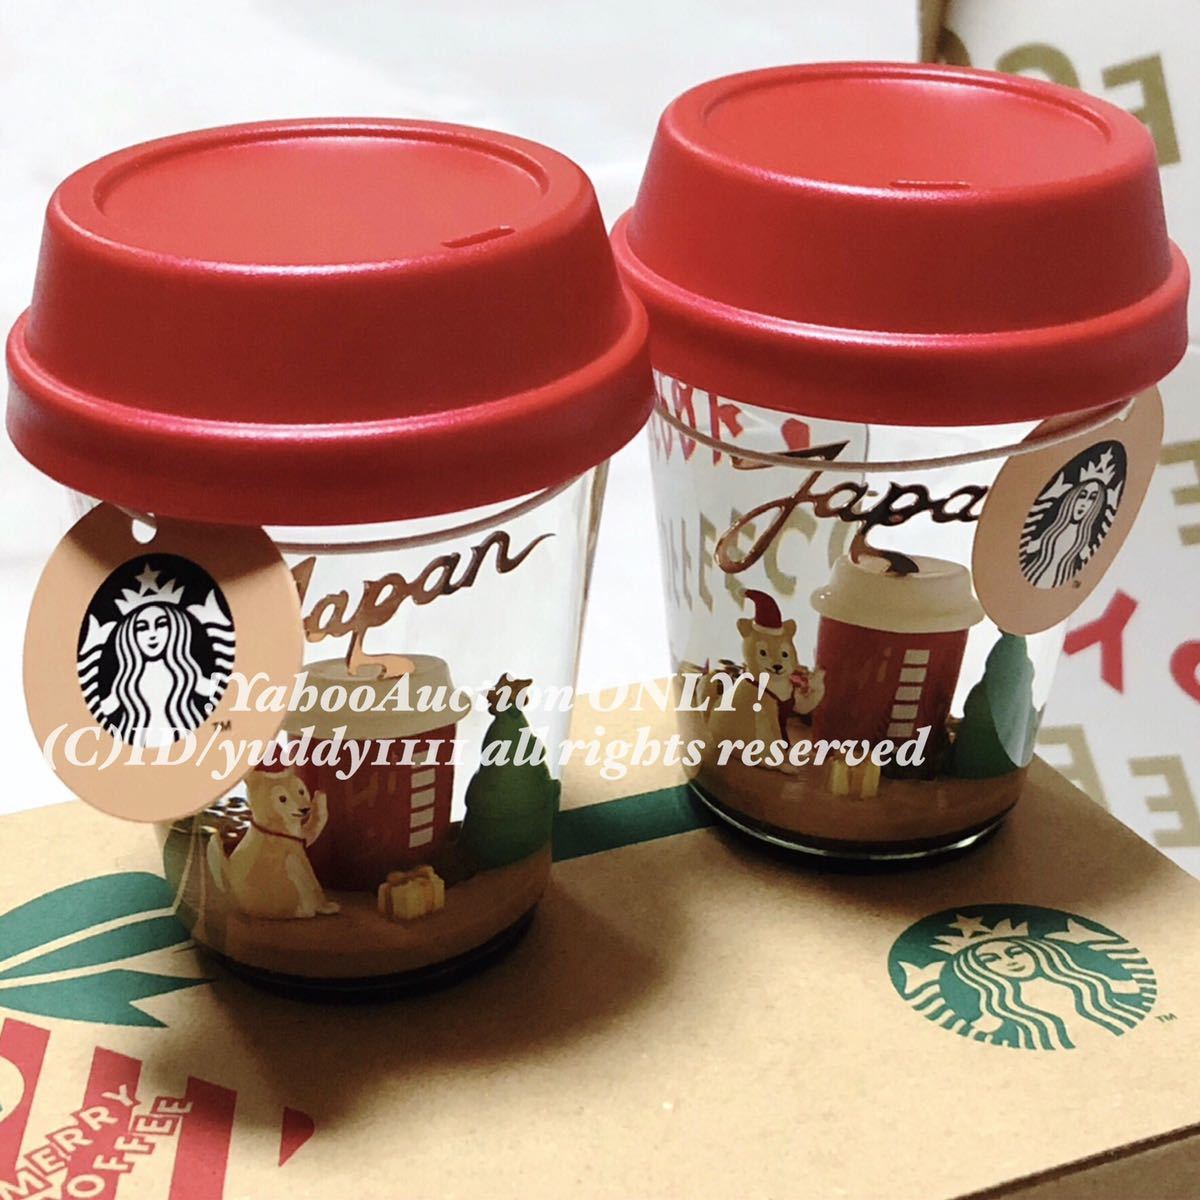  new goods carefuly selected Starbucks Starbucks Hori te-2019 snow dome TOGO RED CUP limitation shopping bag / gift box Japan limitation start ba prompt decision 